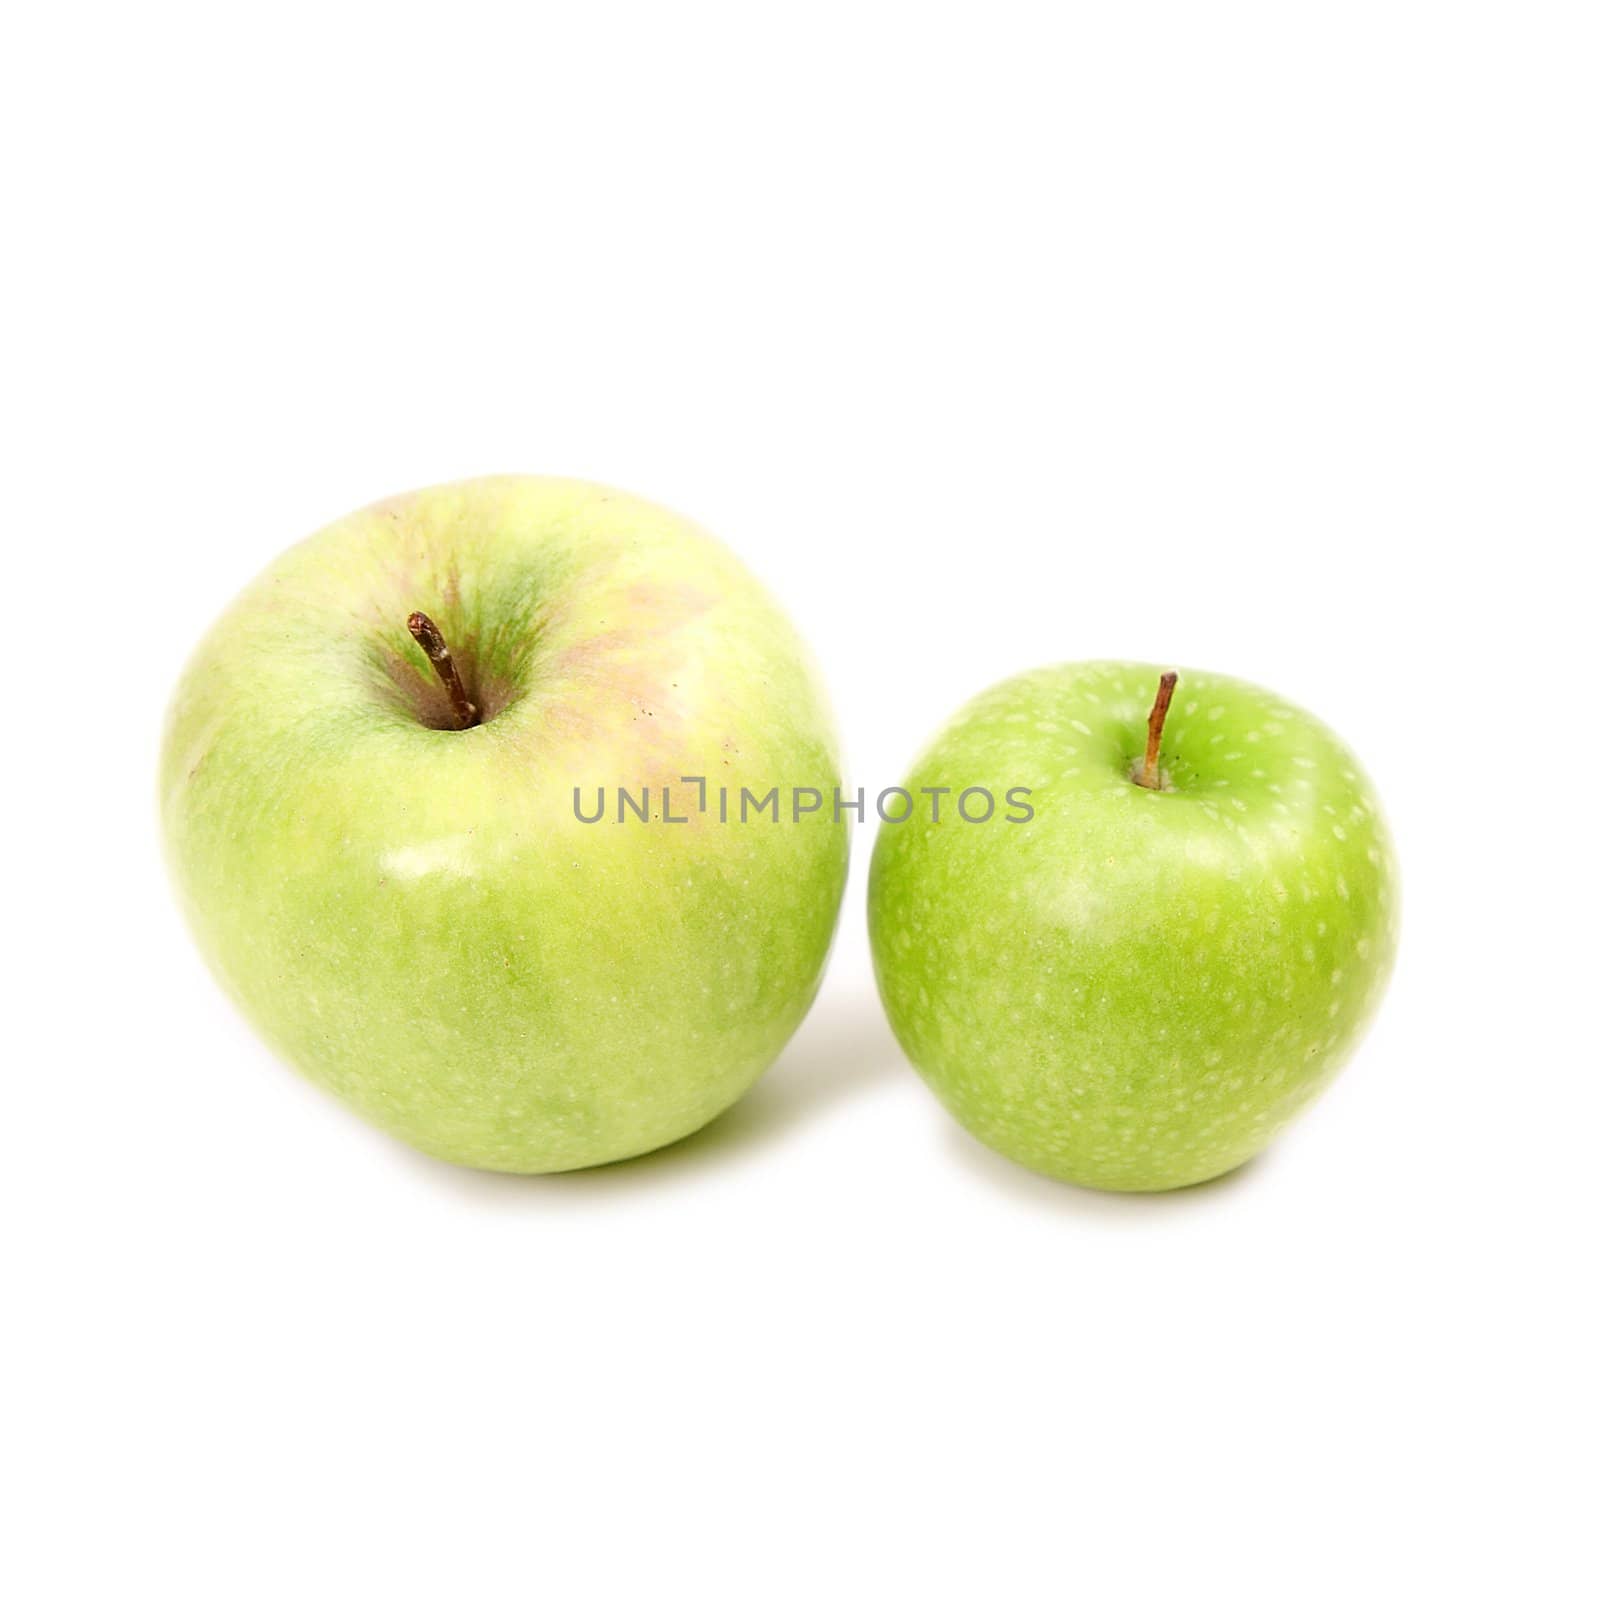 Two green apples on white background close-up